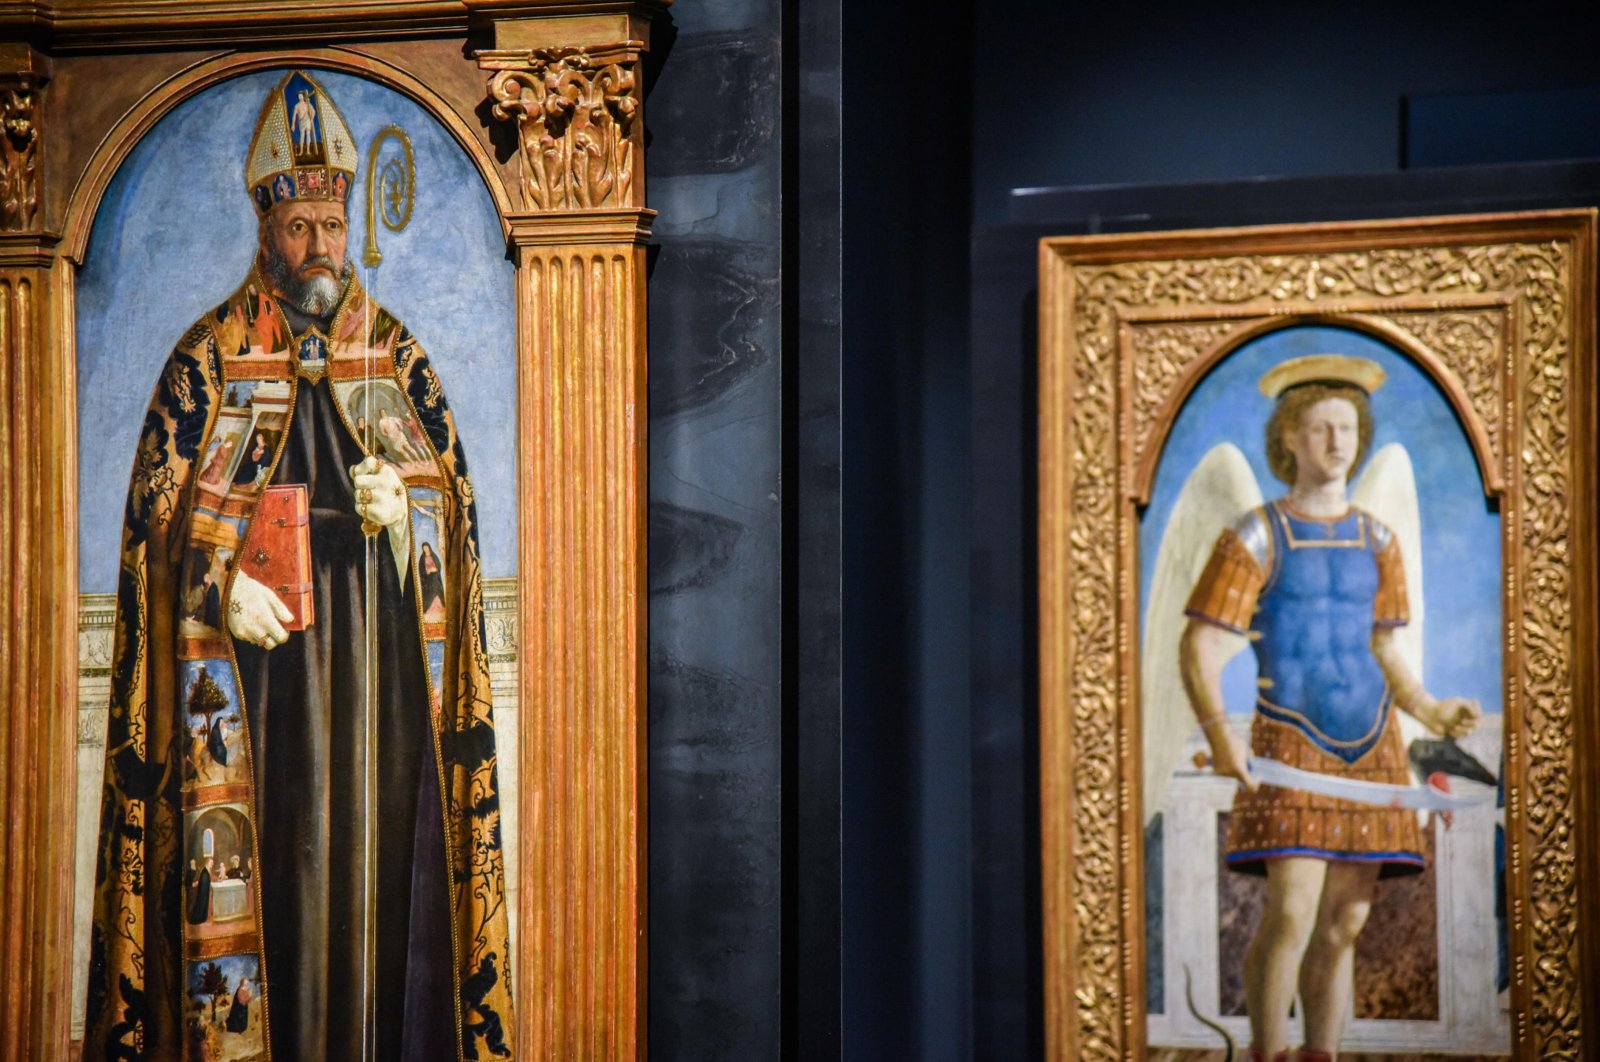 The paintings &quot;Sant’Agostino&quot; (L) and &quot;San Michele Arcangelo&quot; (R), two panels of the Augustinian Polyptych created by Piero Della Francesca, are on display during the exhibition &quot;Piero della Francesca and the reunited Augustinian Polyptych&quot; at the Poldi Pezzoli Museum in Milan, Italy, March 19, 2024. (EPA Photo)